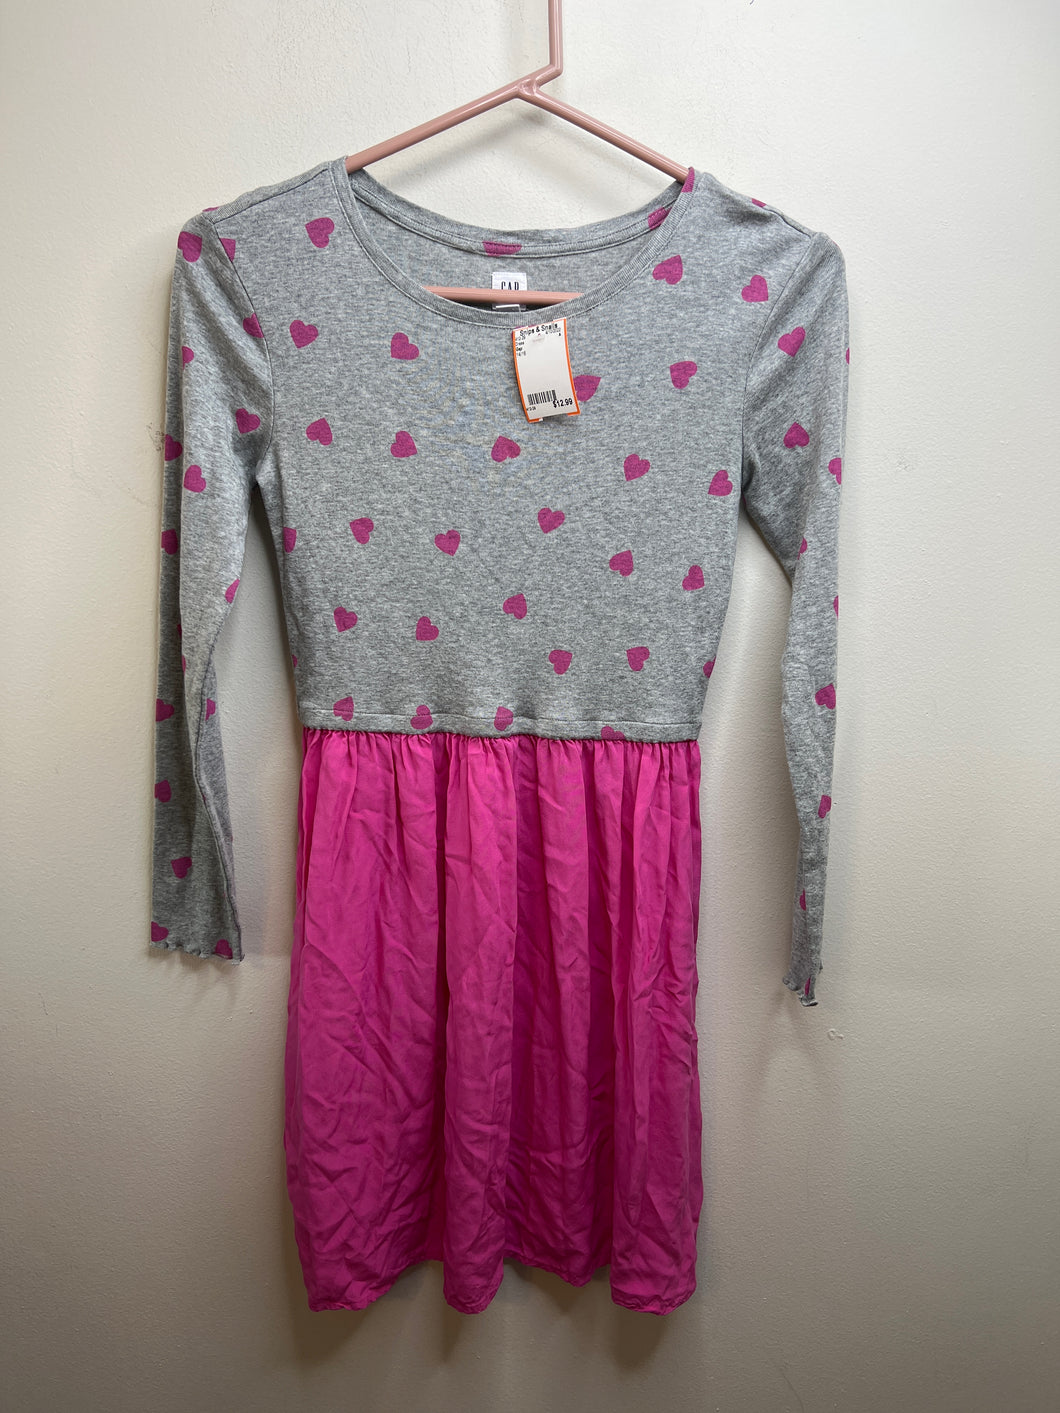 Girls size 14/16 Gap Long-sleeve pink and gray with hearts Dress